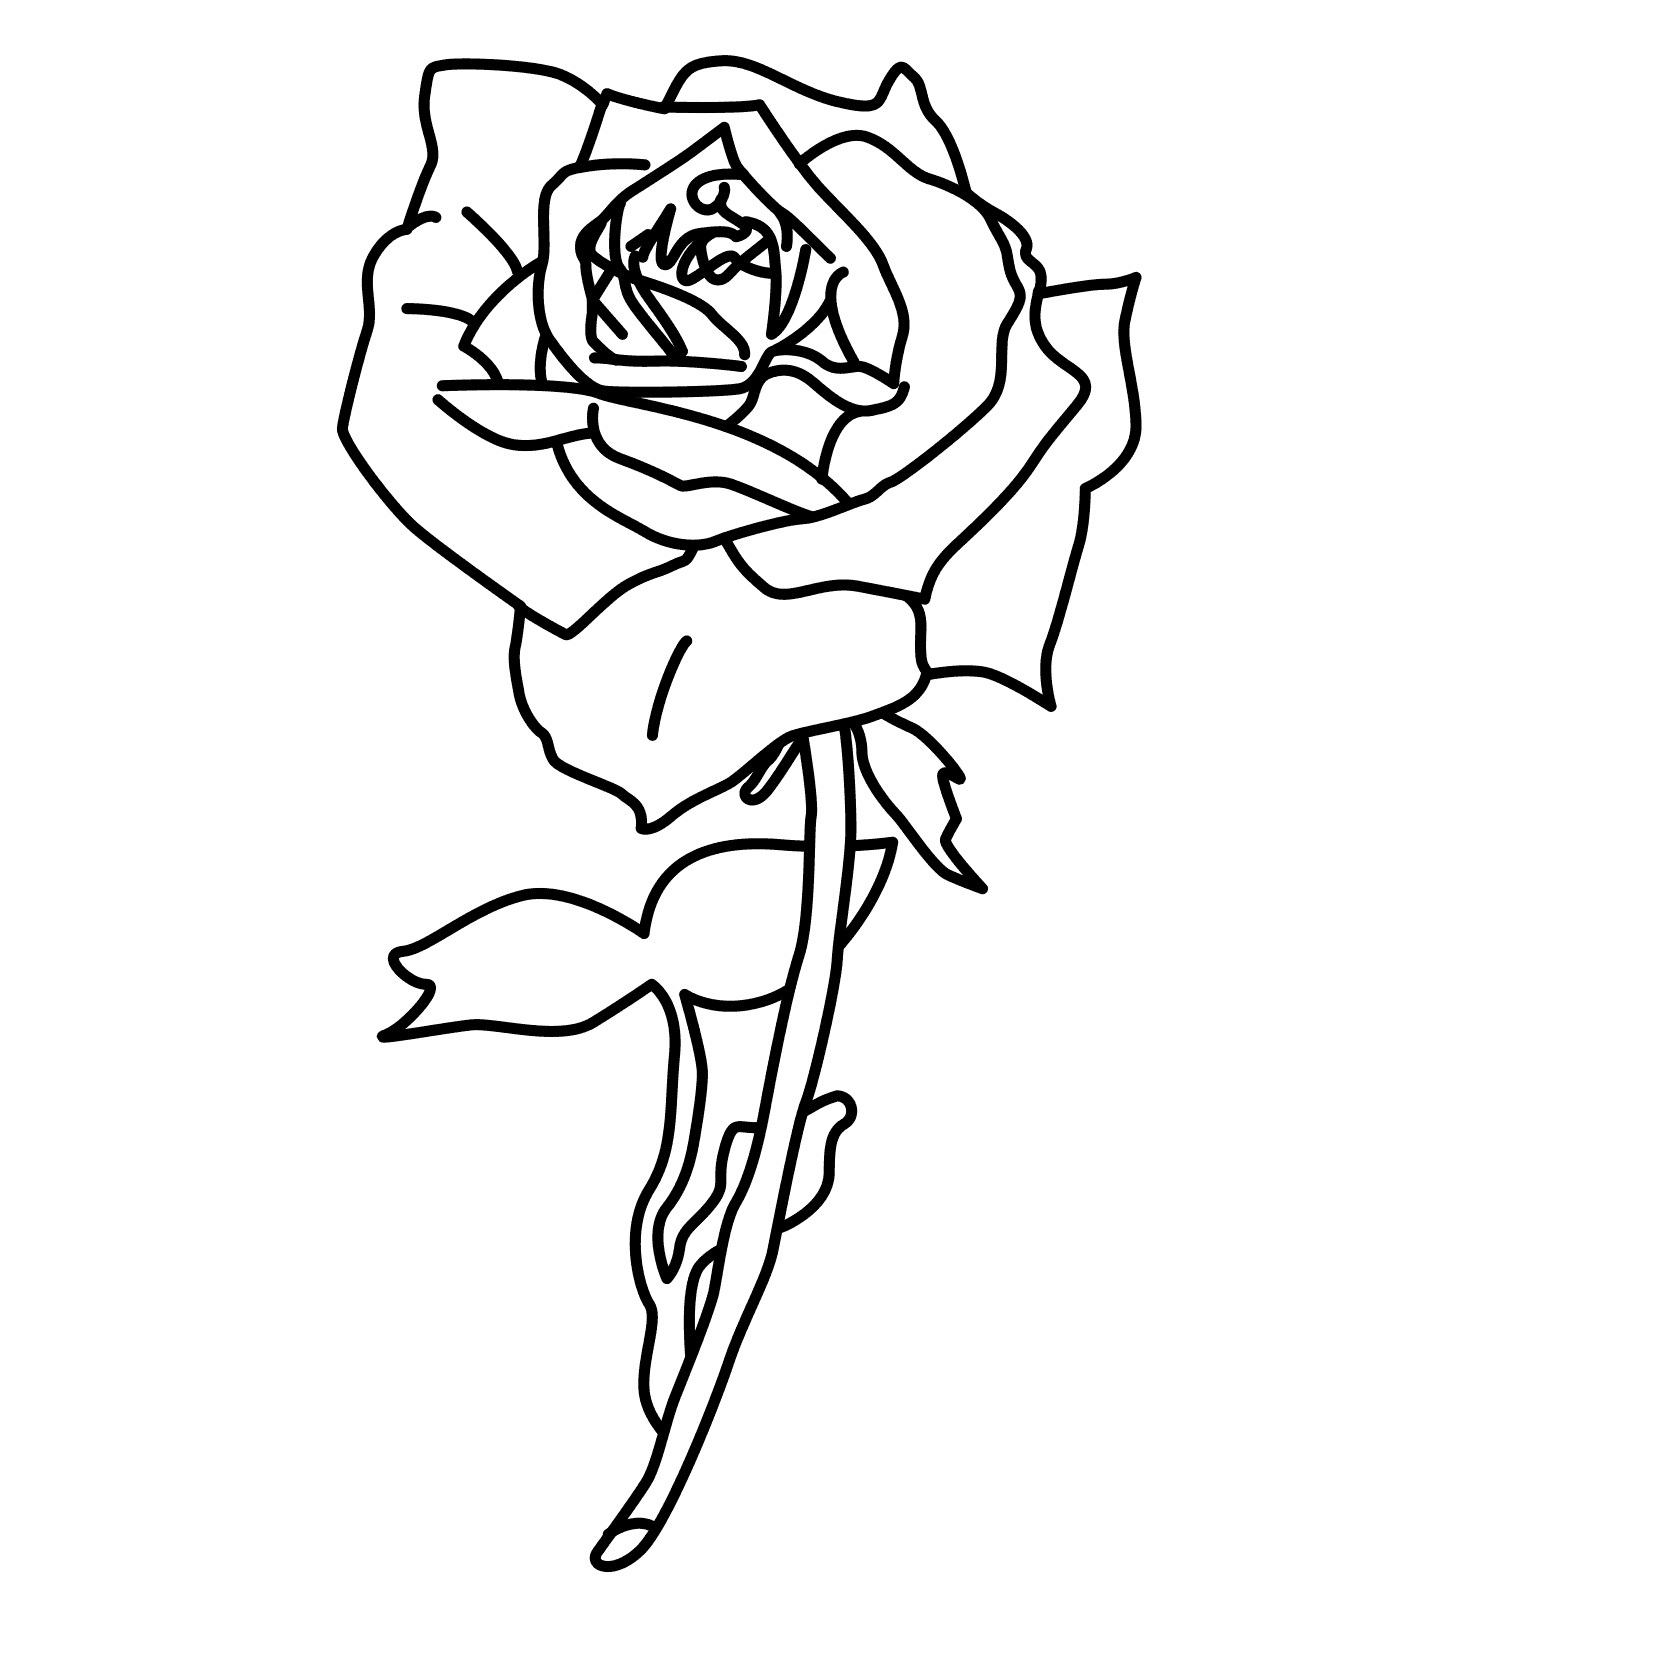 41-rose-coloring-page-free-printable-images